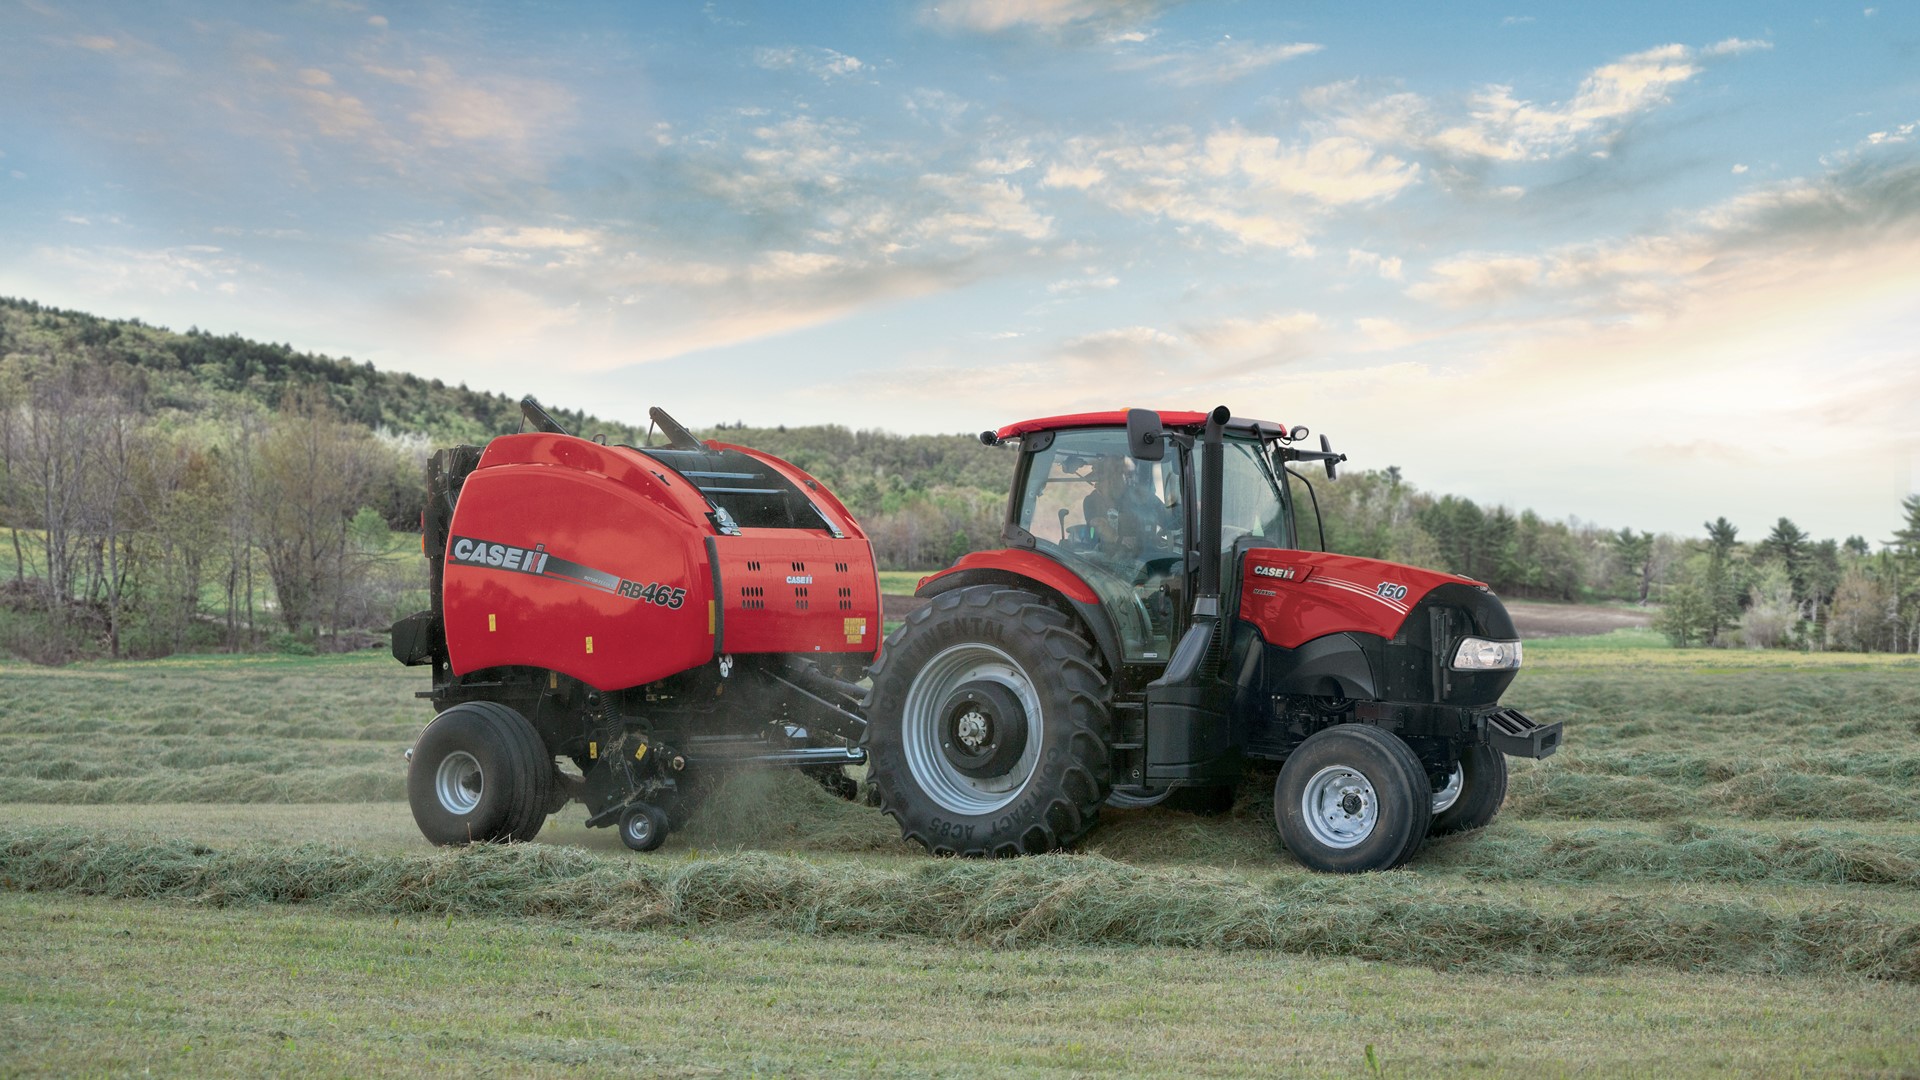 New Maxxum® series 2WD tractors from Case IH create efficient power dispersion